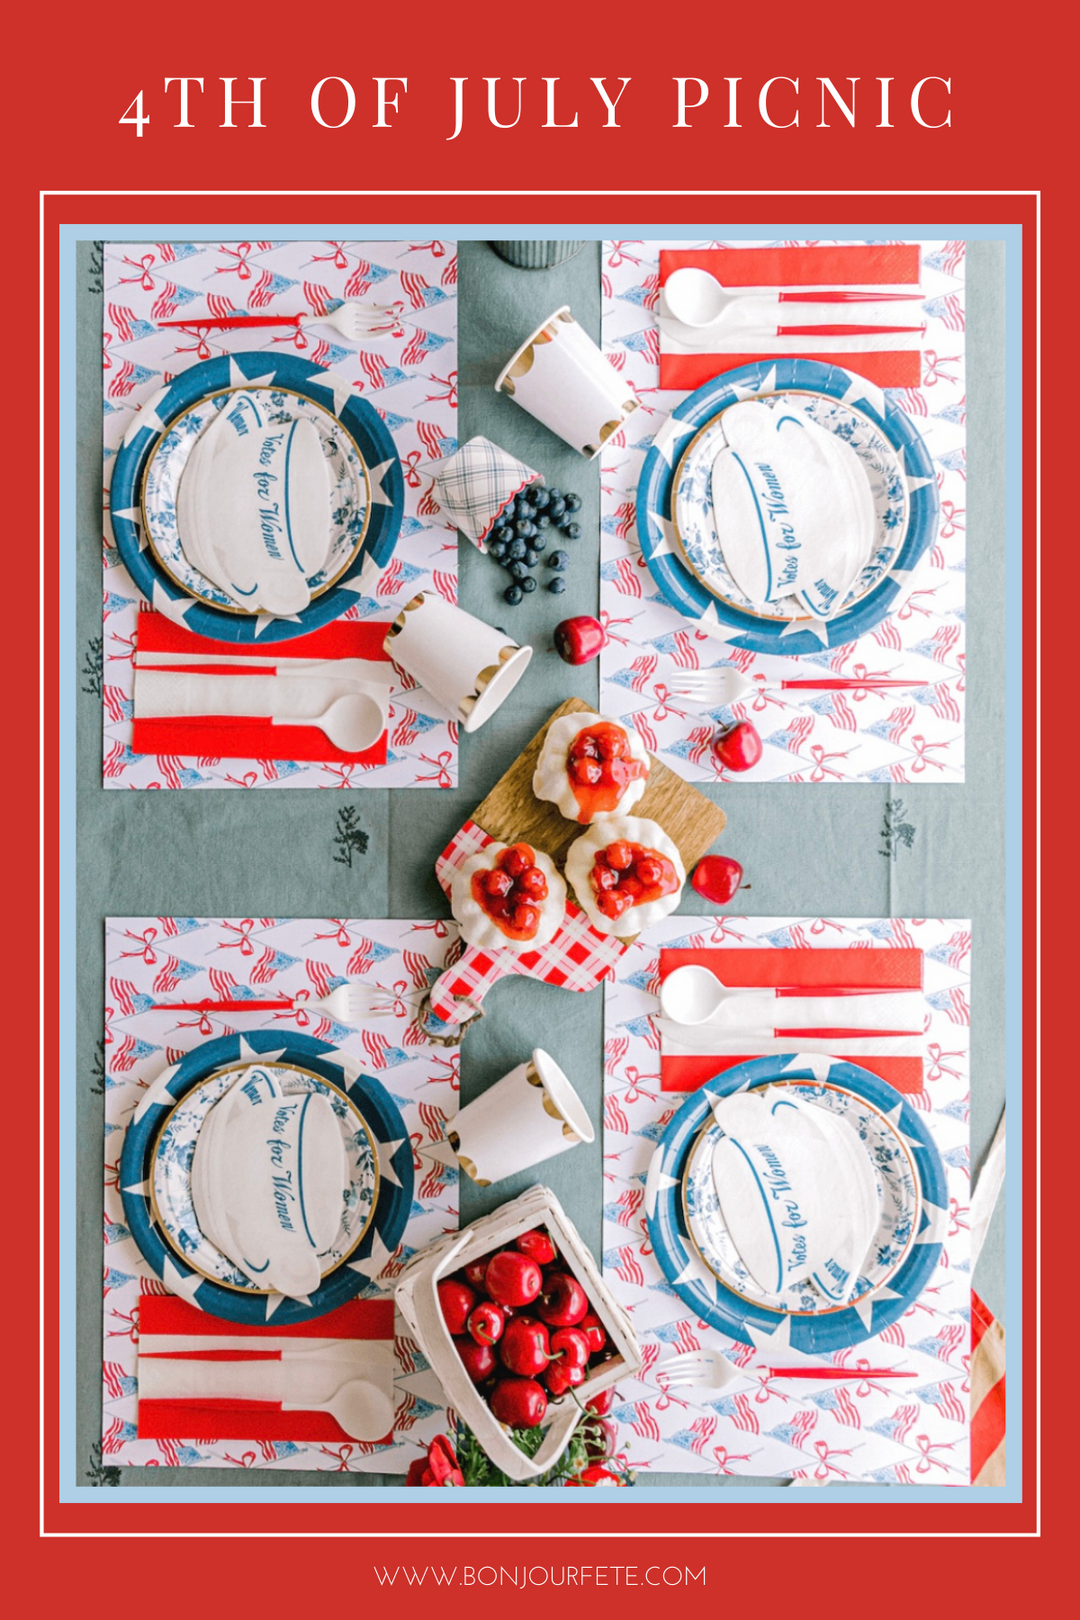 4TH OF JULY PARTY IDEAS FOR THE BEST PATRIOTIC PICNIC